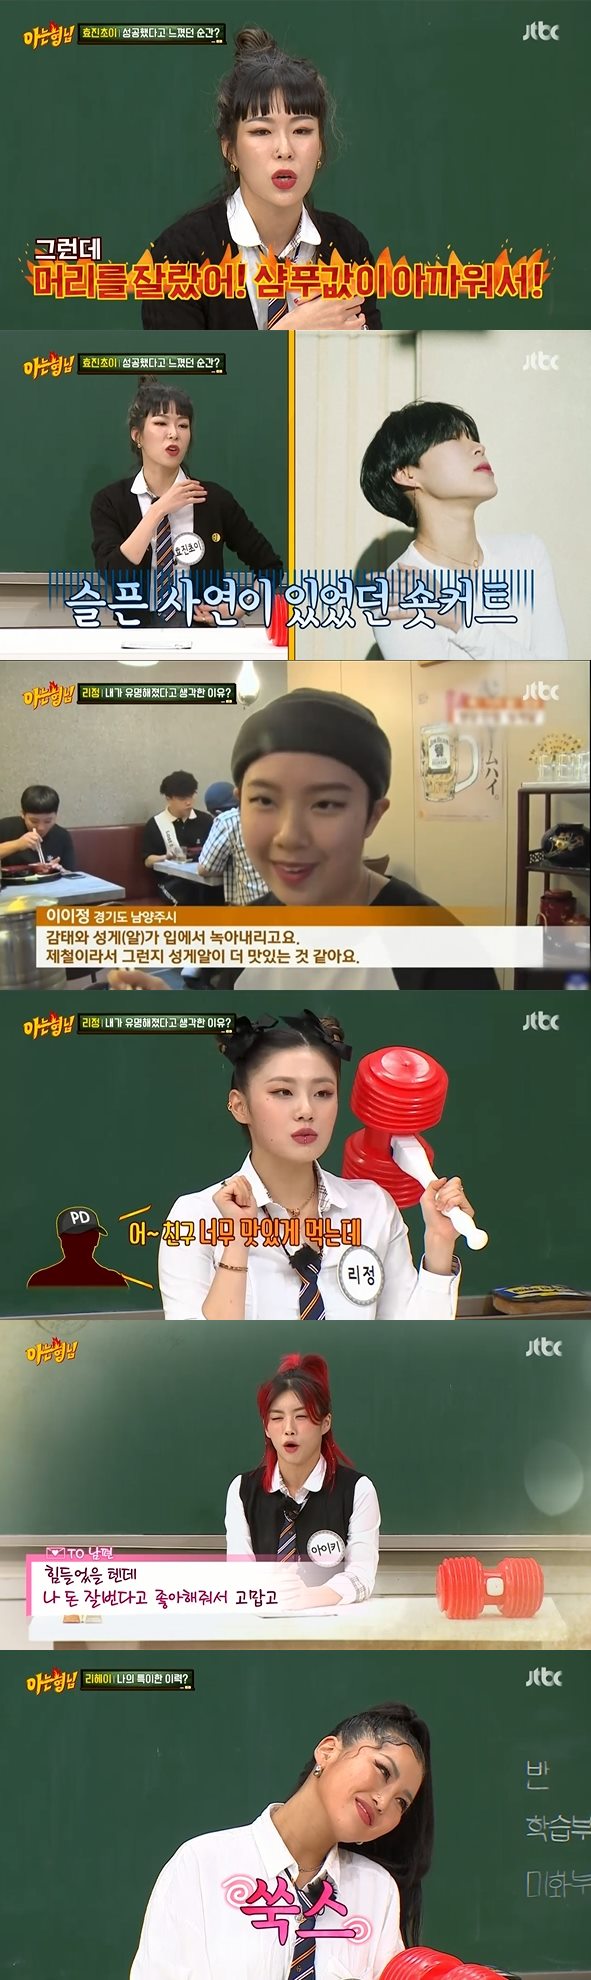 JTBC Knowing Bros, which was broadcast on the 27th, starred Gabi, hyojin choi, Leehei, Noje, Monica, Honey Jay, Lee Jung and iKey, the leaders of Mnet Street Woman Fighter.The Get Me Right segment followed last week, with iKey first saying: Ive had an absurd Misunderstood once because of Father.It happened during the marriage ceremony, he says.When I marriage, Father was in his 40s, he said, referring to the Misunderstood that he had been with Father at the time of his brides position but had done with Husband.In addition, he said, I was on the marriage anniversary just before the SUfa final, but I could not send it together. I would have been hard, but I thank you for making money.I did not spend my marriage anniversary, so I finished Supa and lets spend the night. Lee Ha-yi boasted a unique singing ability. He received the grand prize at the Jeju Youth Song Festival in the past, and he was impressed with his high-quality singing ability with the spiders adult child.Then he told me about his difficult past. He was a battle dancer in Busan. He came to Seoul. It was hard to eat and live.At that time, my hair was so long, but the shampoo was so bad that I cut my hair. In addition, after receiving the dance academy The Lesson once, he walked the choreographers path. Suddenly, if you tell me to quit tomorrow, can you quit? Lets work with us.I thought it was a scam. At that time, the representative said, There are many people who dance well in Seoul, but I have never seen anyone who is desperate.Lee also said that he had appeared in the life information program in the past. I went to eat just Zalc and rice.I ate deliciously behind the scenes, and the bishop said, Friend is so delicious, should Friend try it?So I expressed it freely, he said, smiling.Photo = JTBC